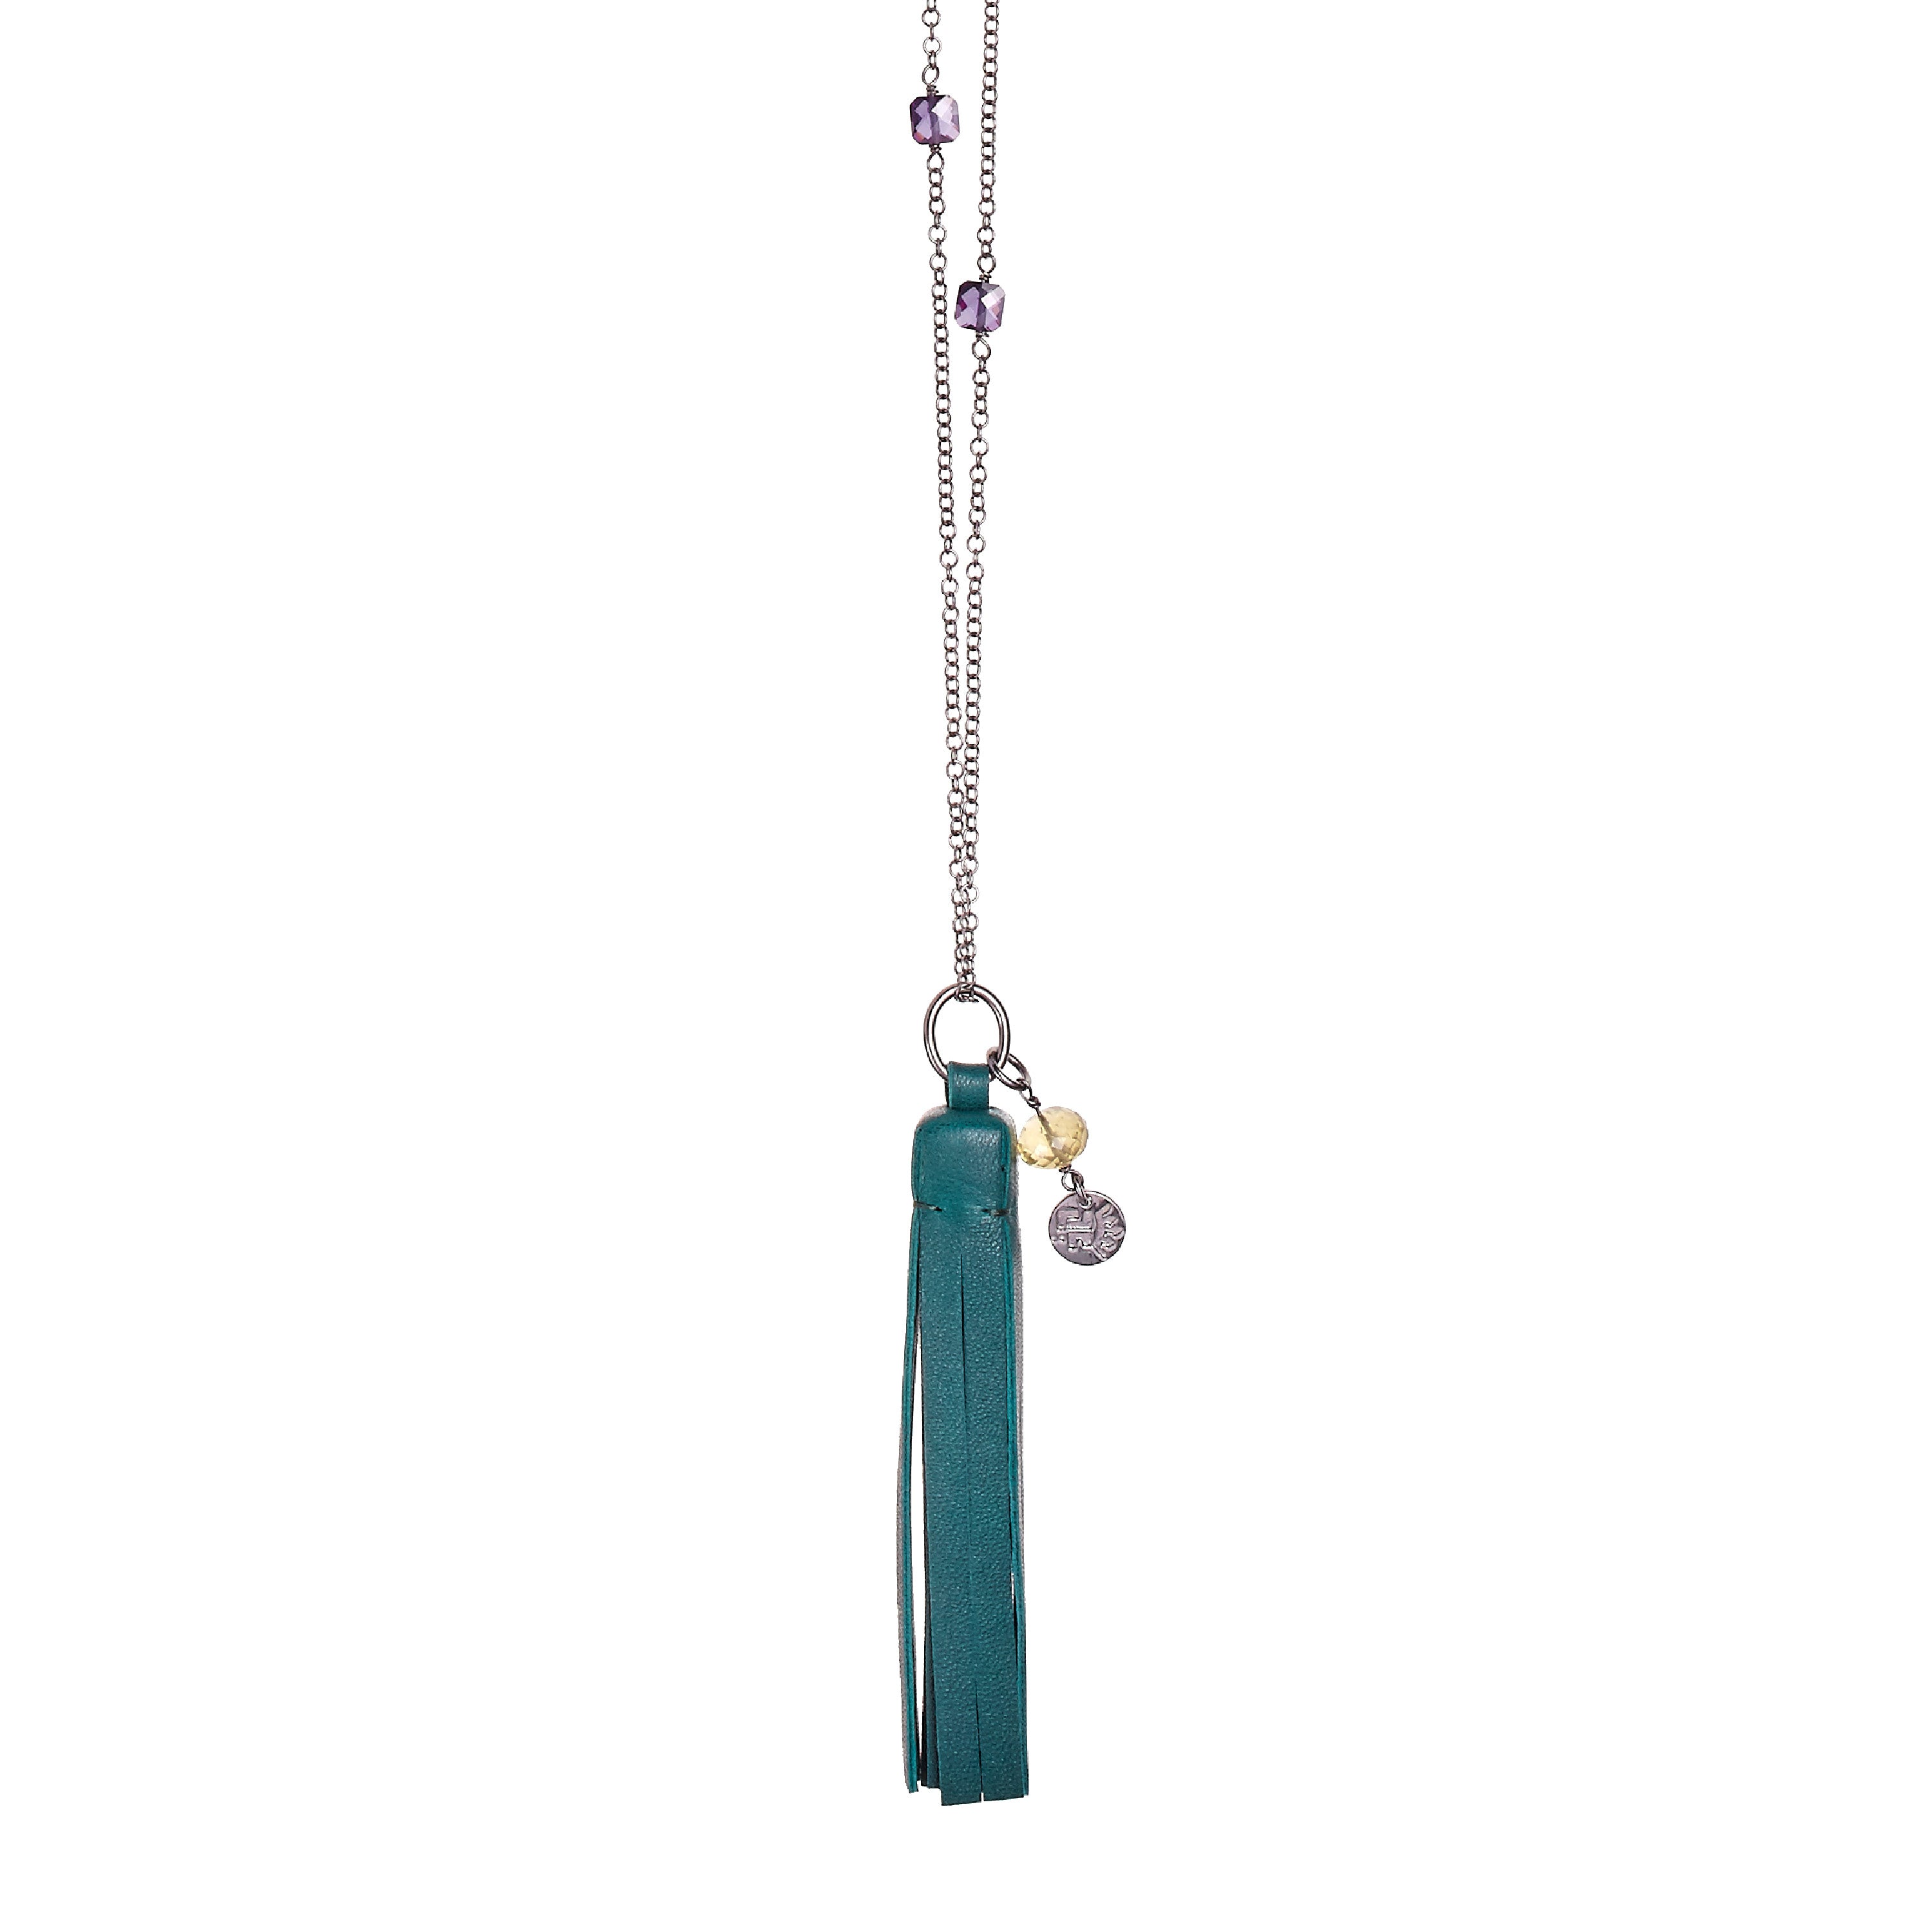 Tassel “Square” Necklace with Green Leather, Zircon and Quartz